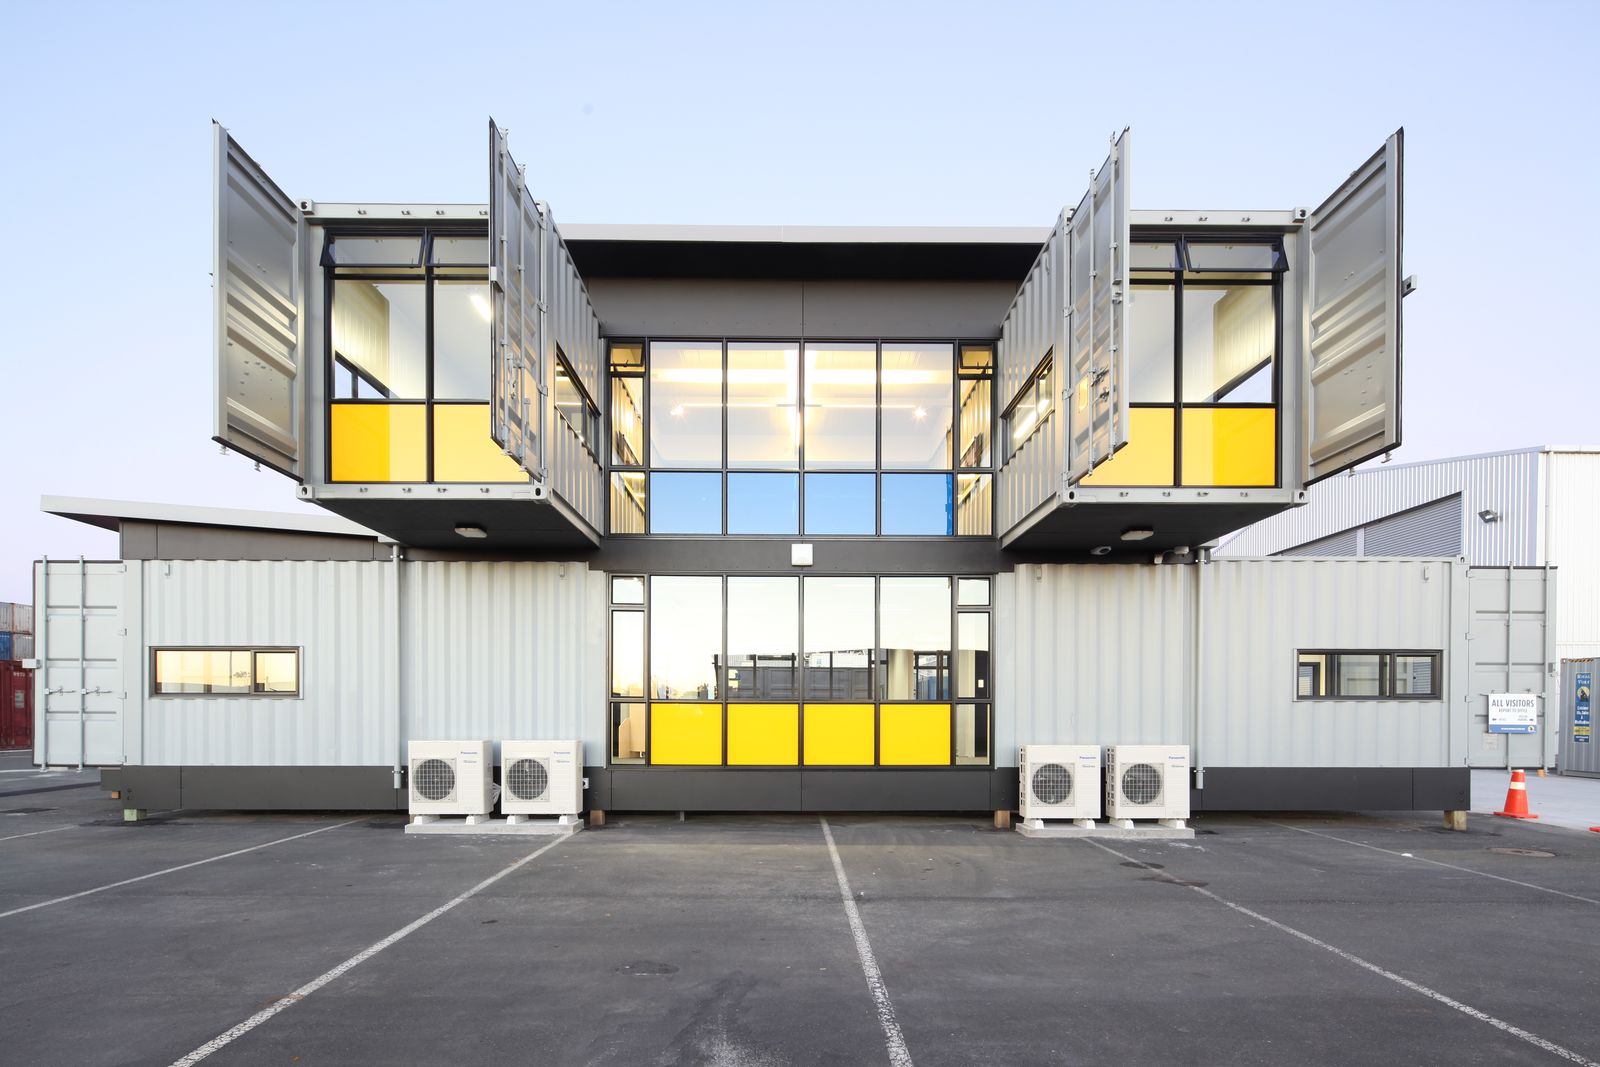 The Auckland Royal Wolf offices are an example of cutting edge, yet practical and versatile container designs that showcase what can be done with these steel boxes